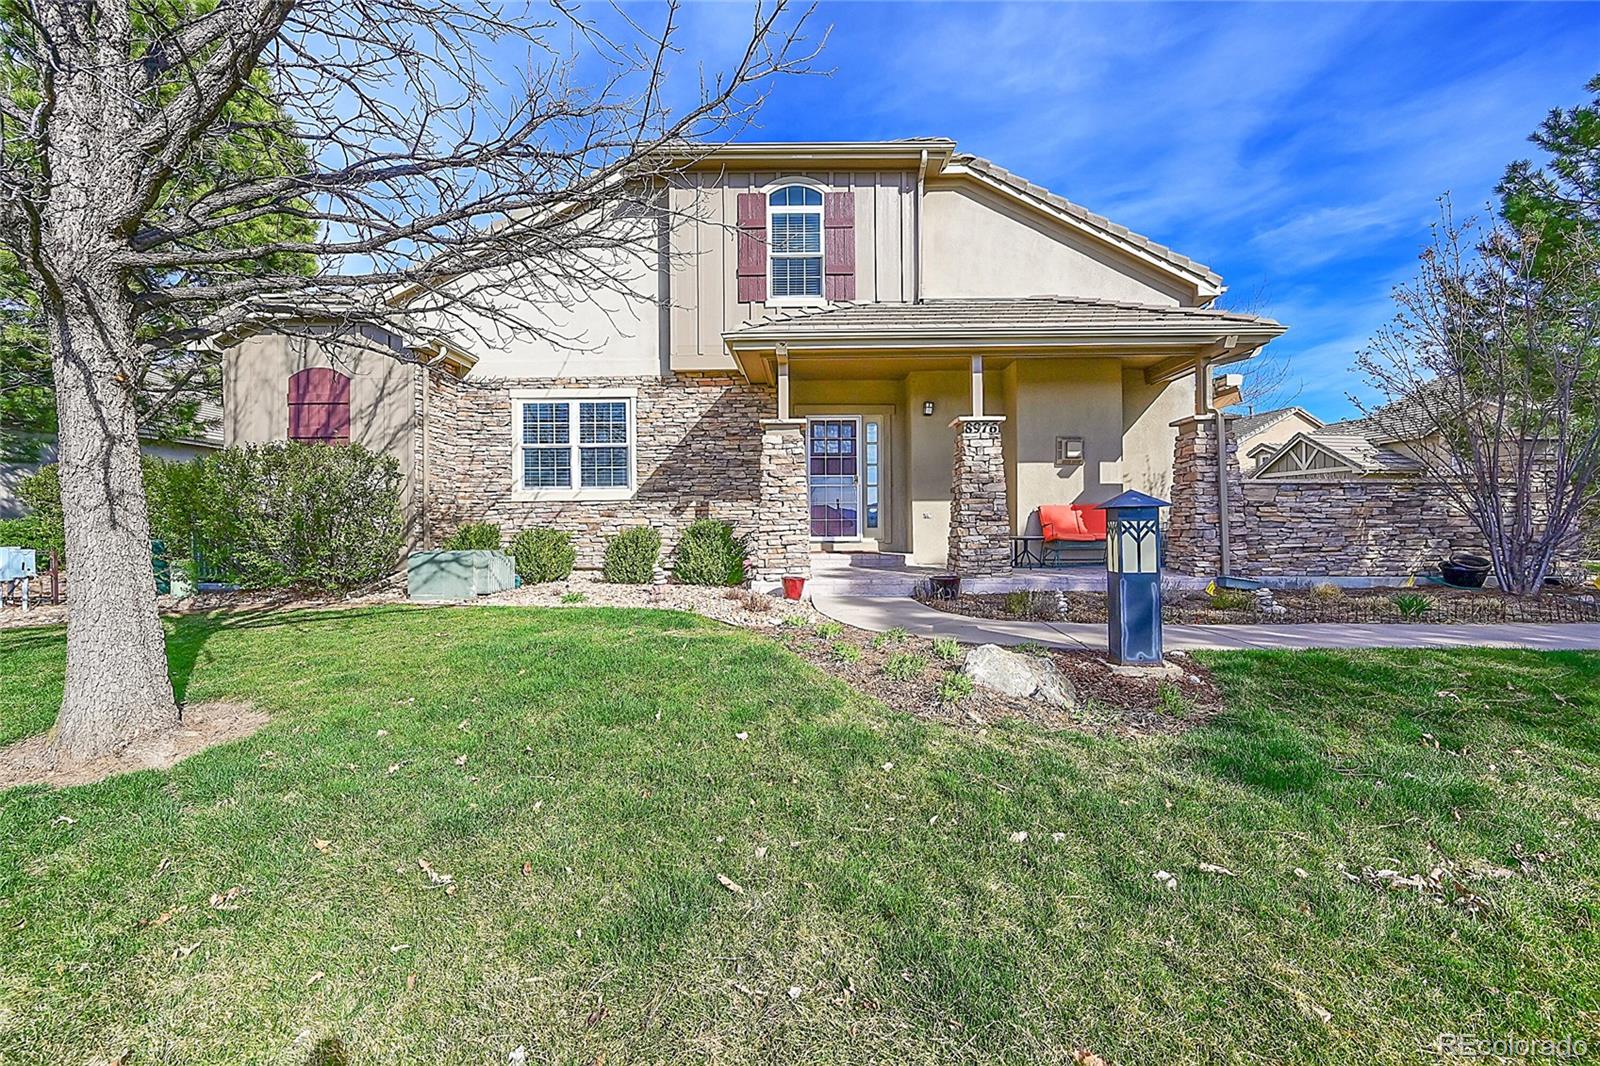 8976  old tom morris circle, highlands ranch sold home. Closed on 2024-05-02 for $740,000.